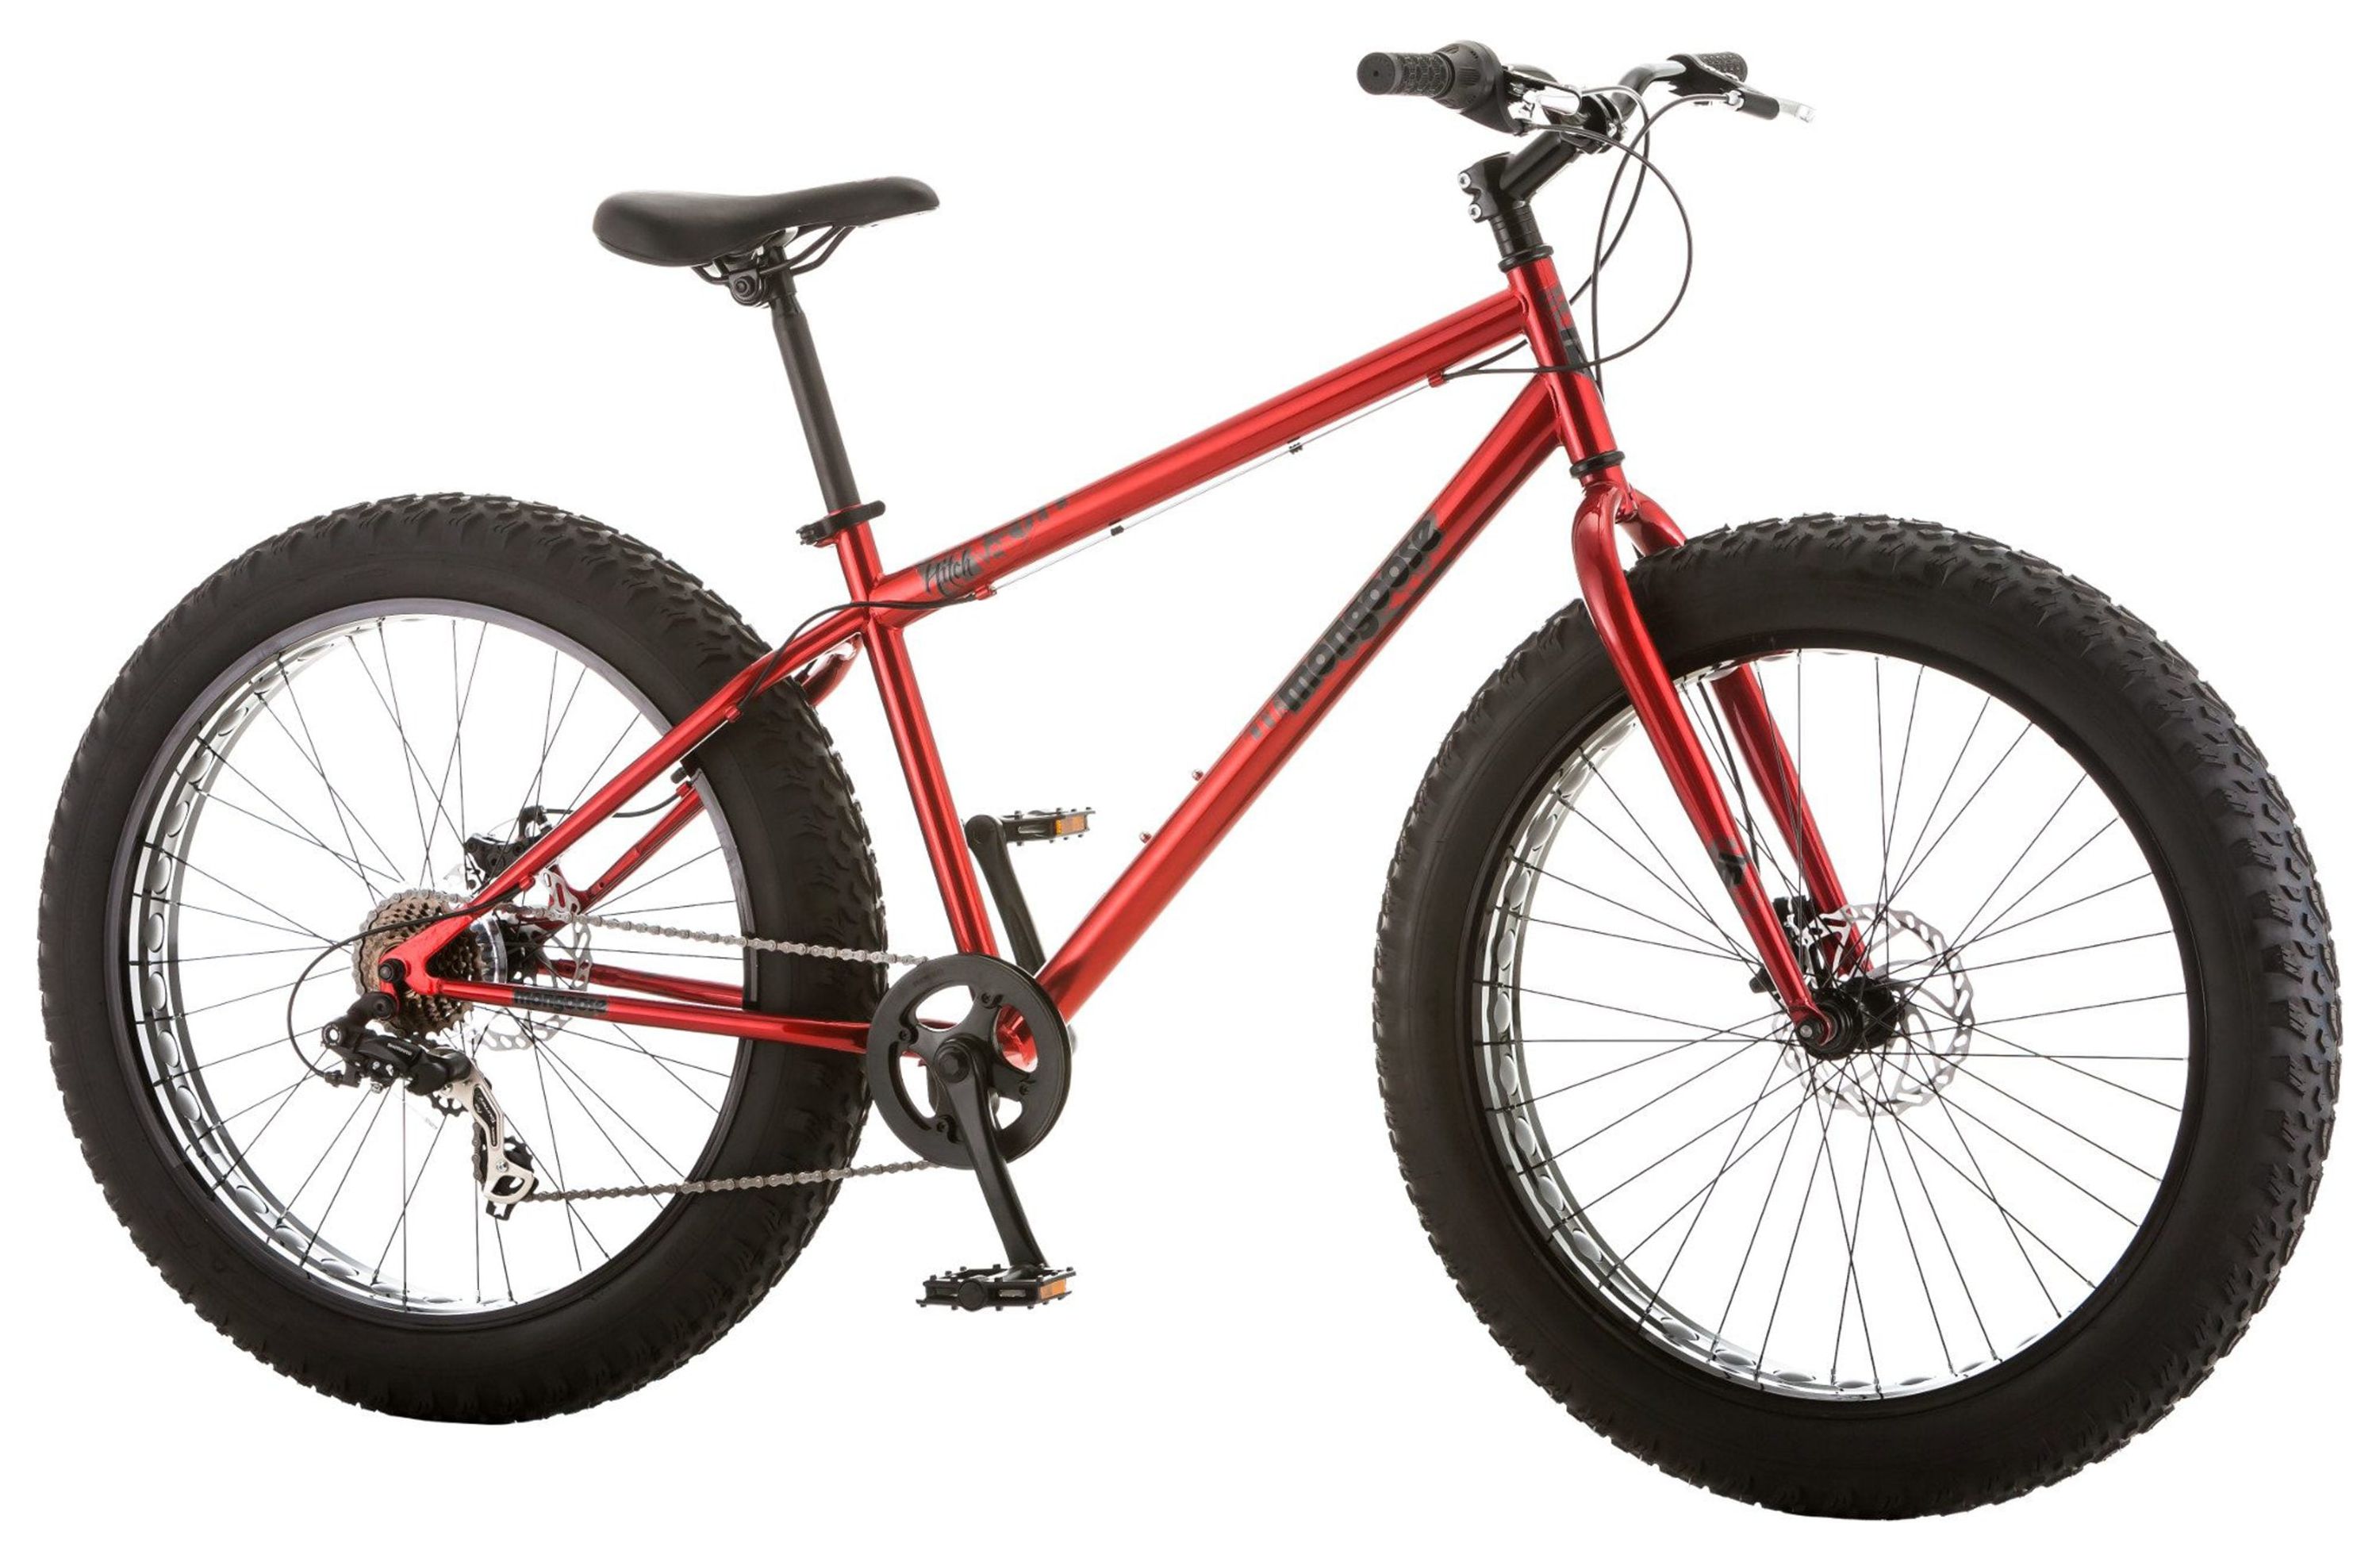 Mongoose Hitch All-Terrain Fat Tire Bike, 26-inch wheels, Men's Style, Red - image 3 of 5